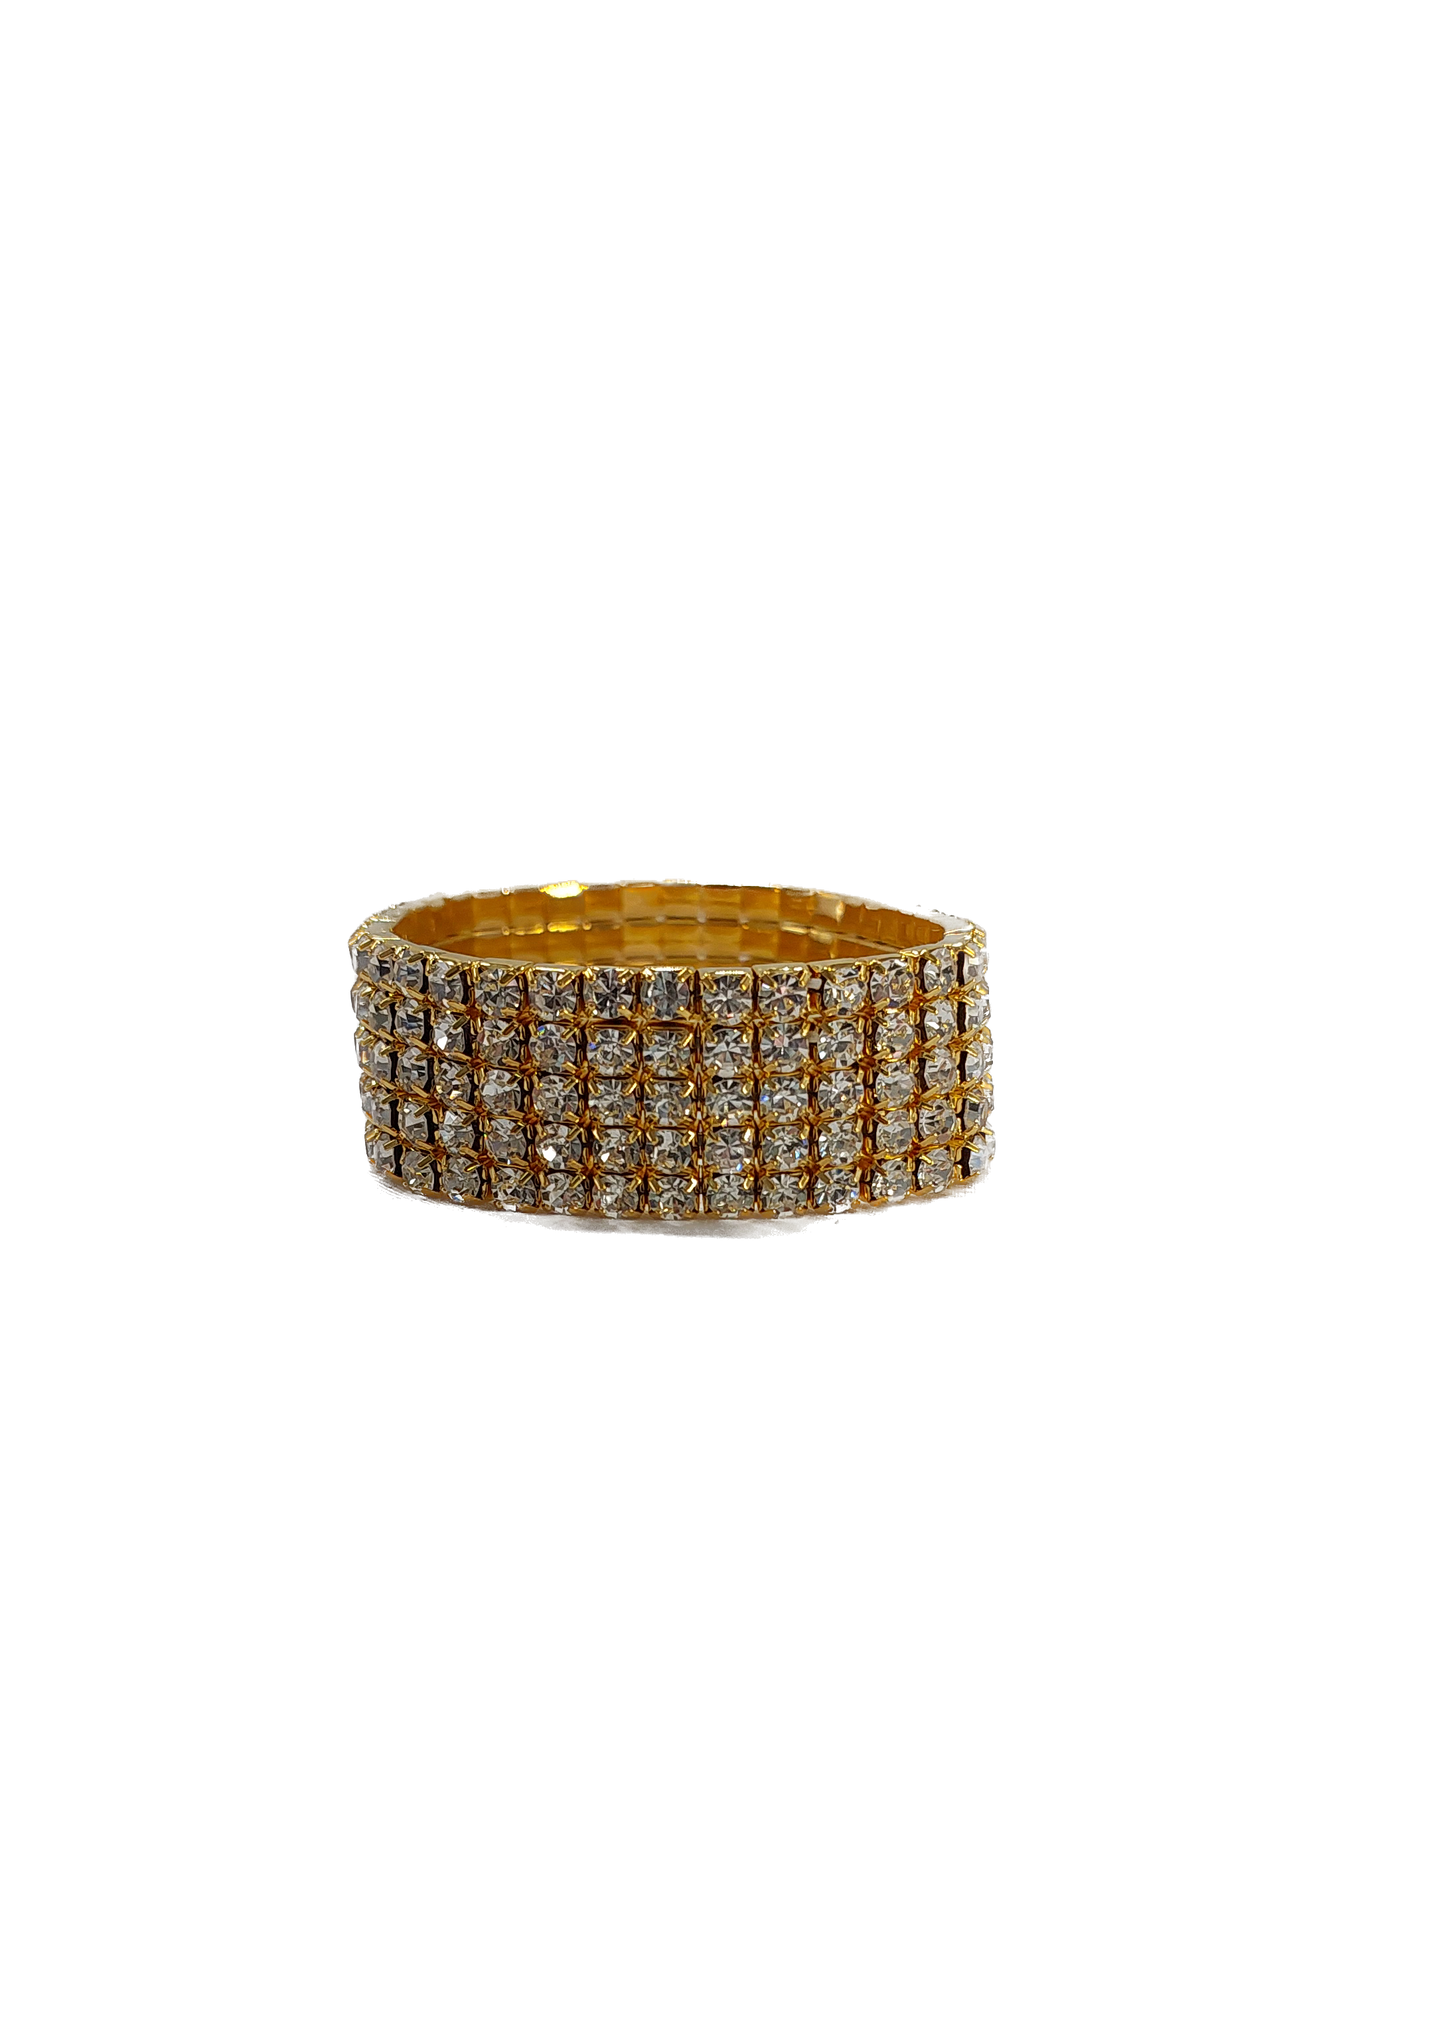 Bracelet 8 Row Crystals GOLD Setting